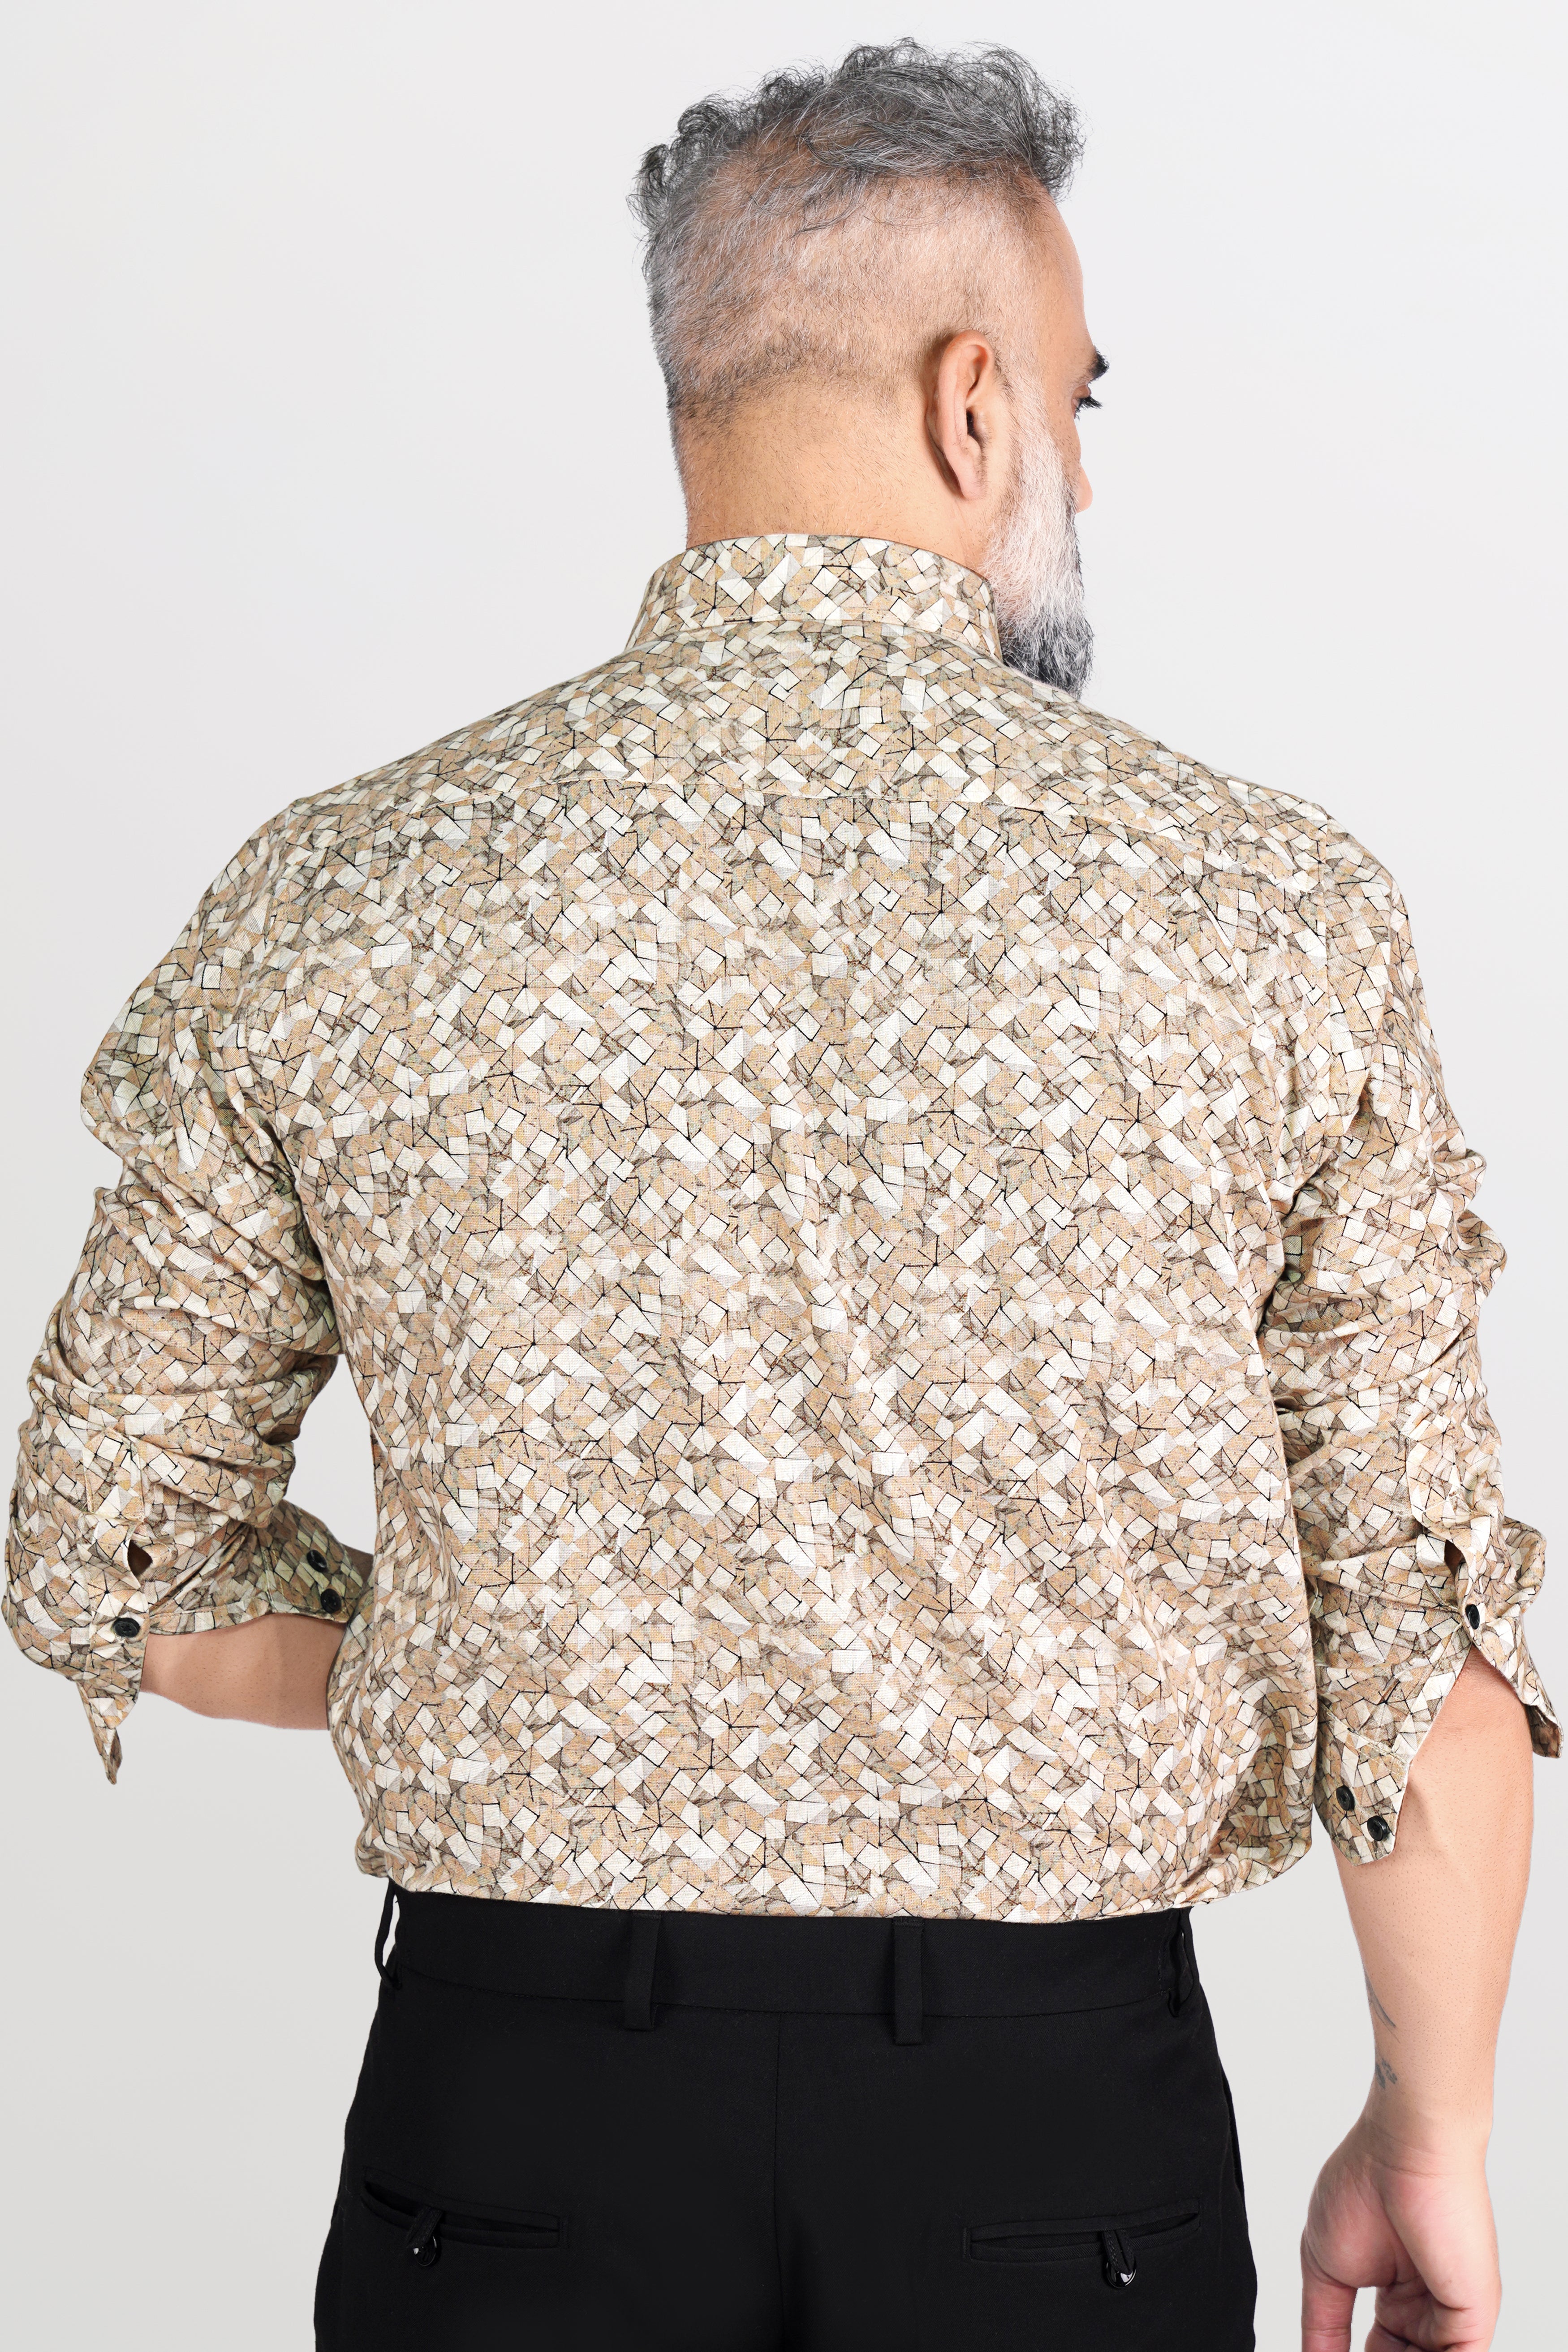 Almond and Sand Dune Brown Printed Luxurious Linen Shirt 10517-BD-BLK-38, 10517-BD-BLK-H-38, 10517-BD-BLK-39, 10517-BD-BLK-H-39, 10517-BD-BLK-40, 10517-BD-BLK-H-40, 10517-BD-BLK-42, 10517-BD-BLK-H-42, 10517-BD-BLK-44, 10517-BD-BLK-H-44, 10517-BD-BLK-46, 10517-BD-BLK-H-46, 10517-BD-BLK-48, 10517-BD-BLK-H-48, 10517-BD-BLK-50, 10517-BD-BLK-H-50, 10517-BD-BLK-52, 10517-BD-BLK-H-52